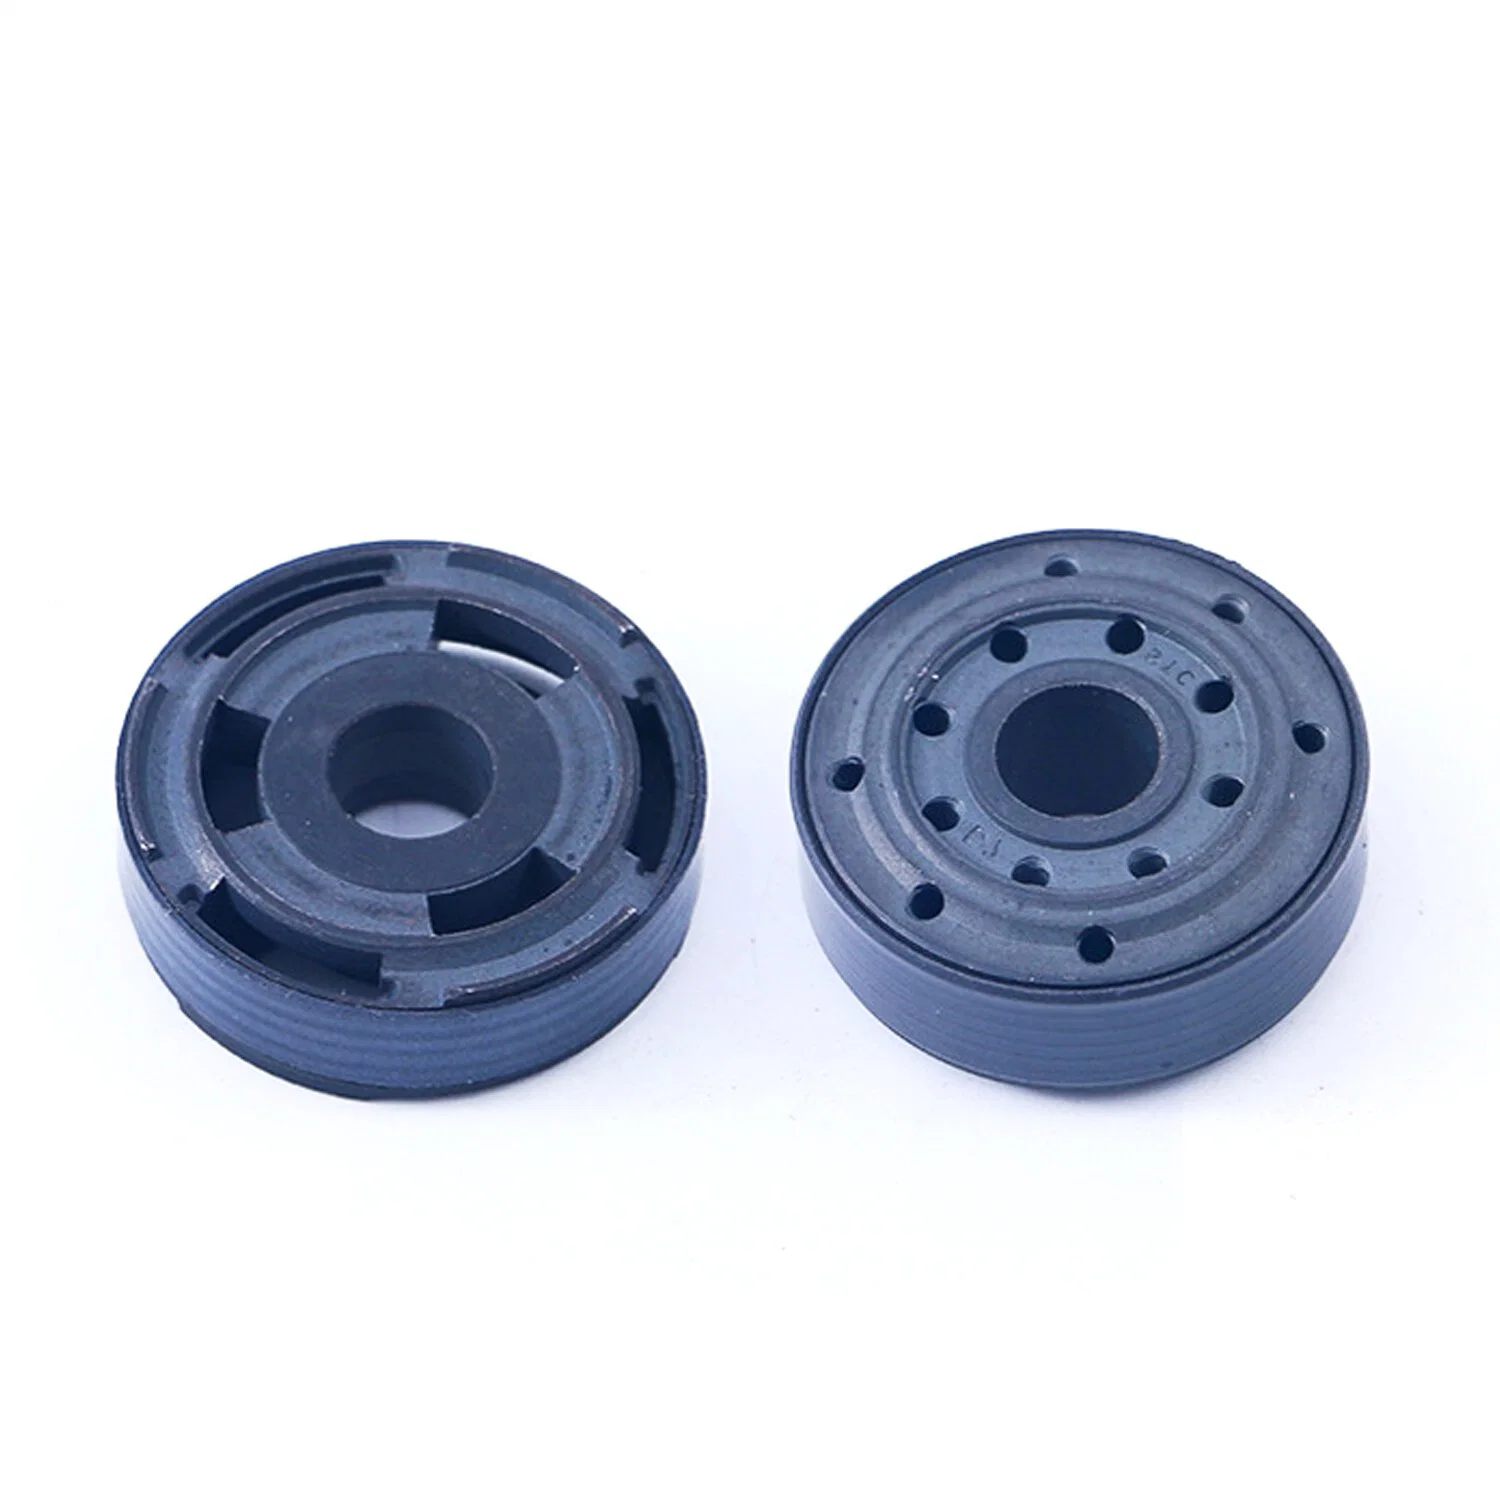 Customizable Powder Metal Sintered Piston Parts for Automotive Shock Absorbers